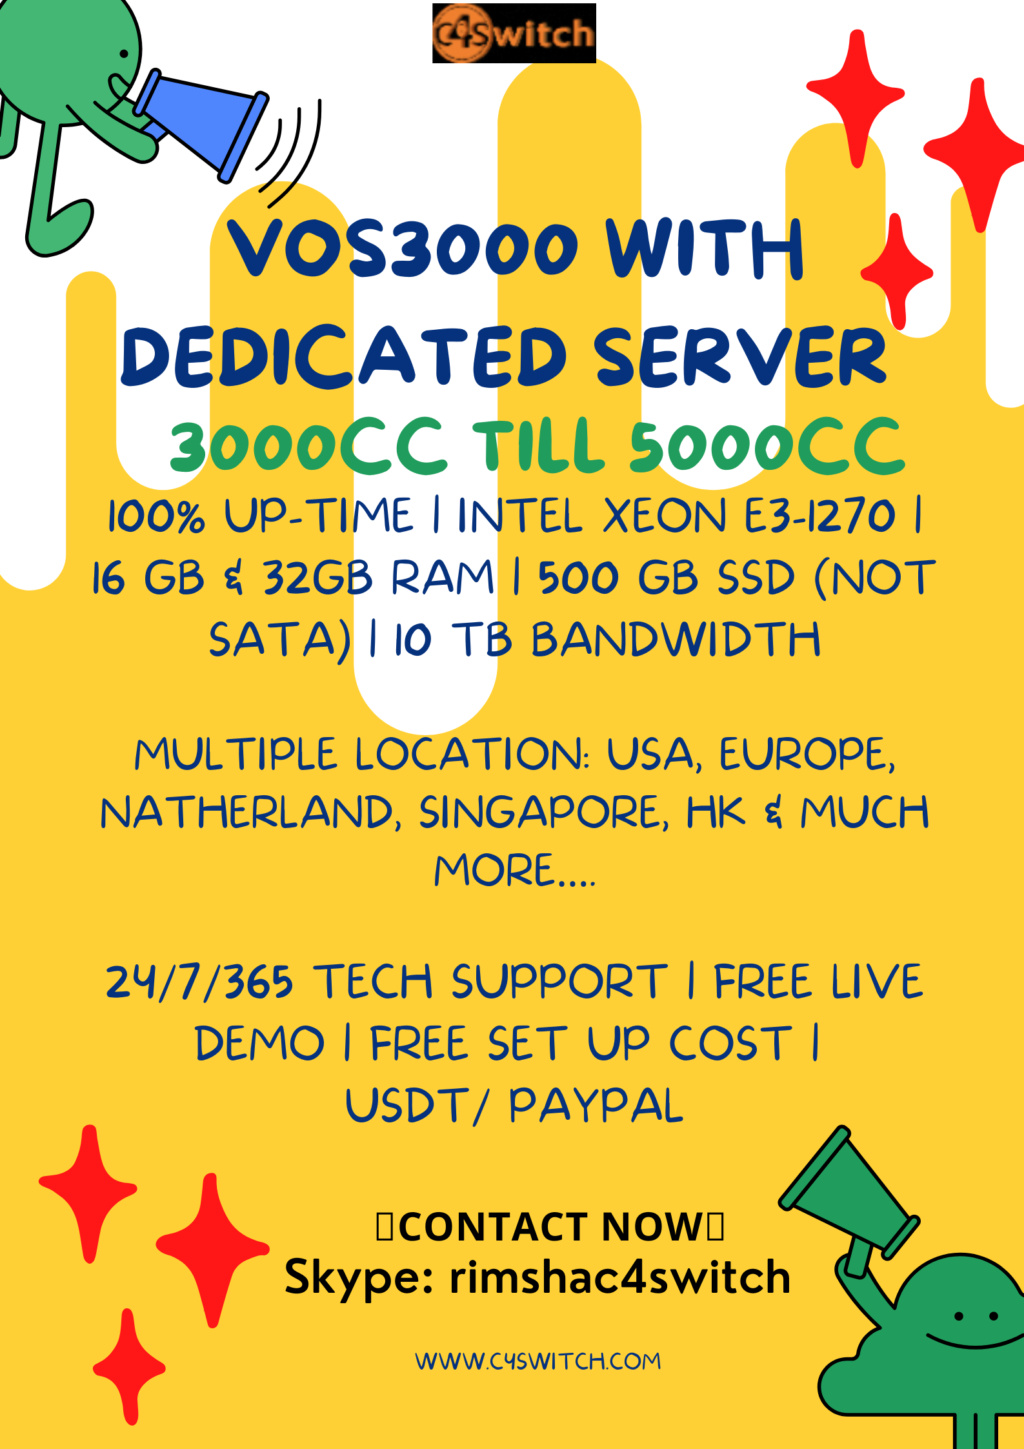 VOS3000 with DEDICATED SERVERS & MULTIPLE CO LOCATIONS.. Vos30011